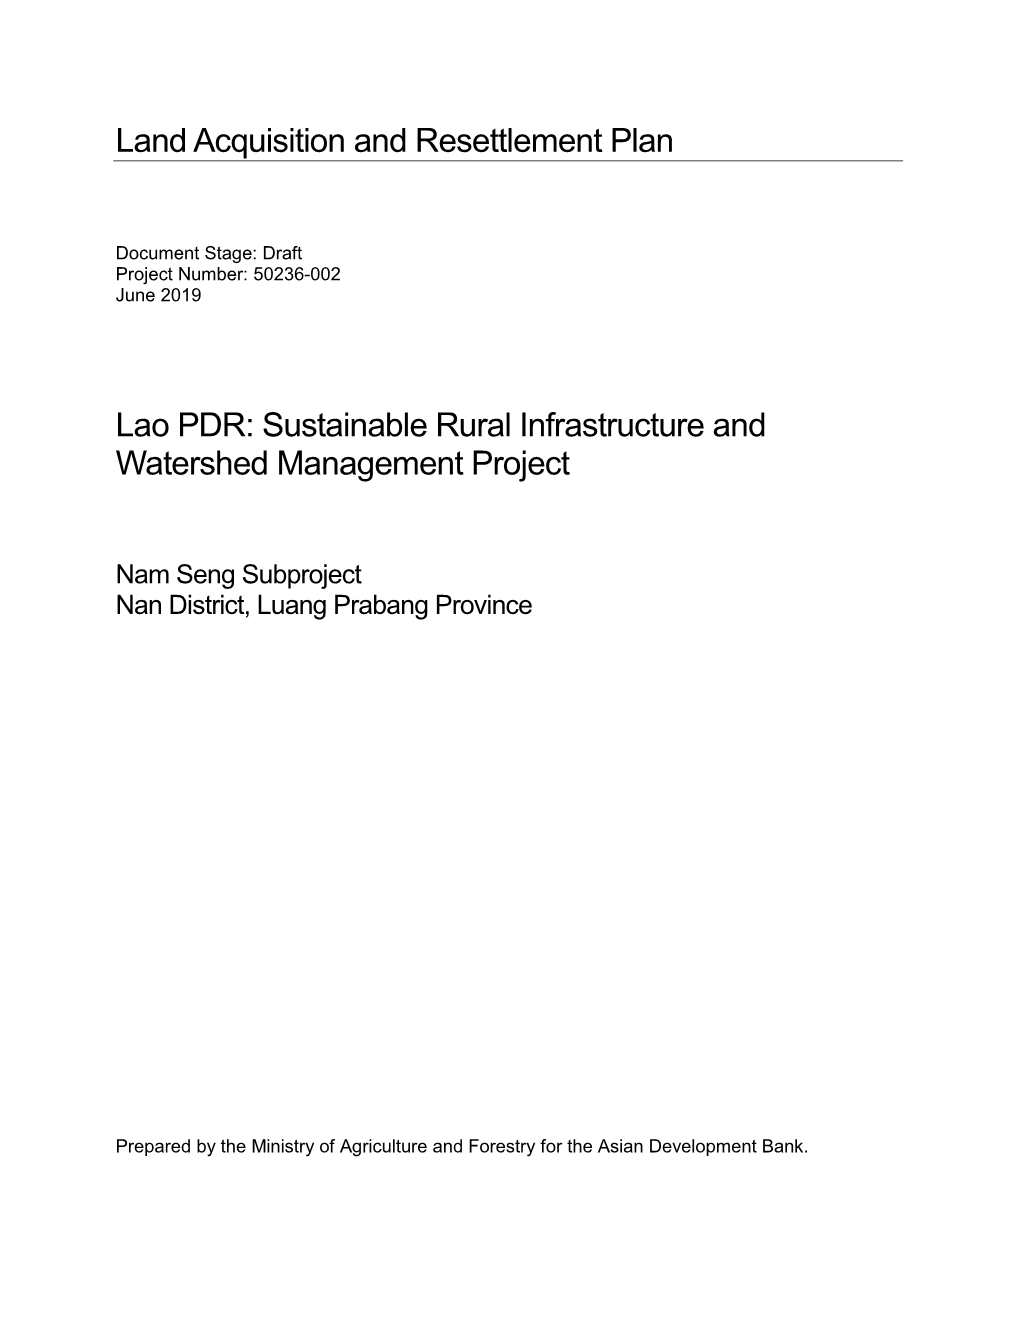 Land Acquisition and Resettlement Plan Lao